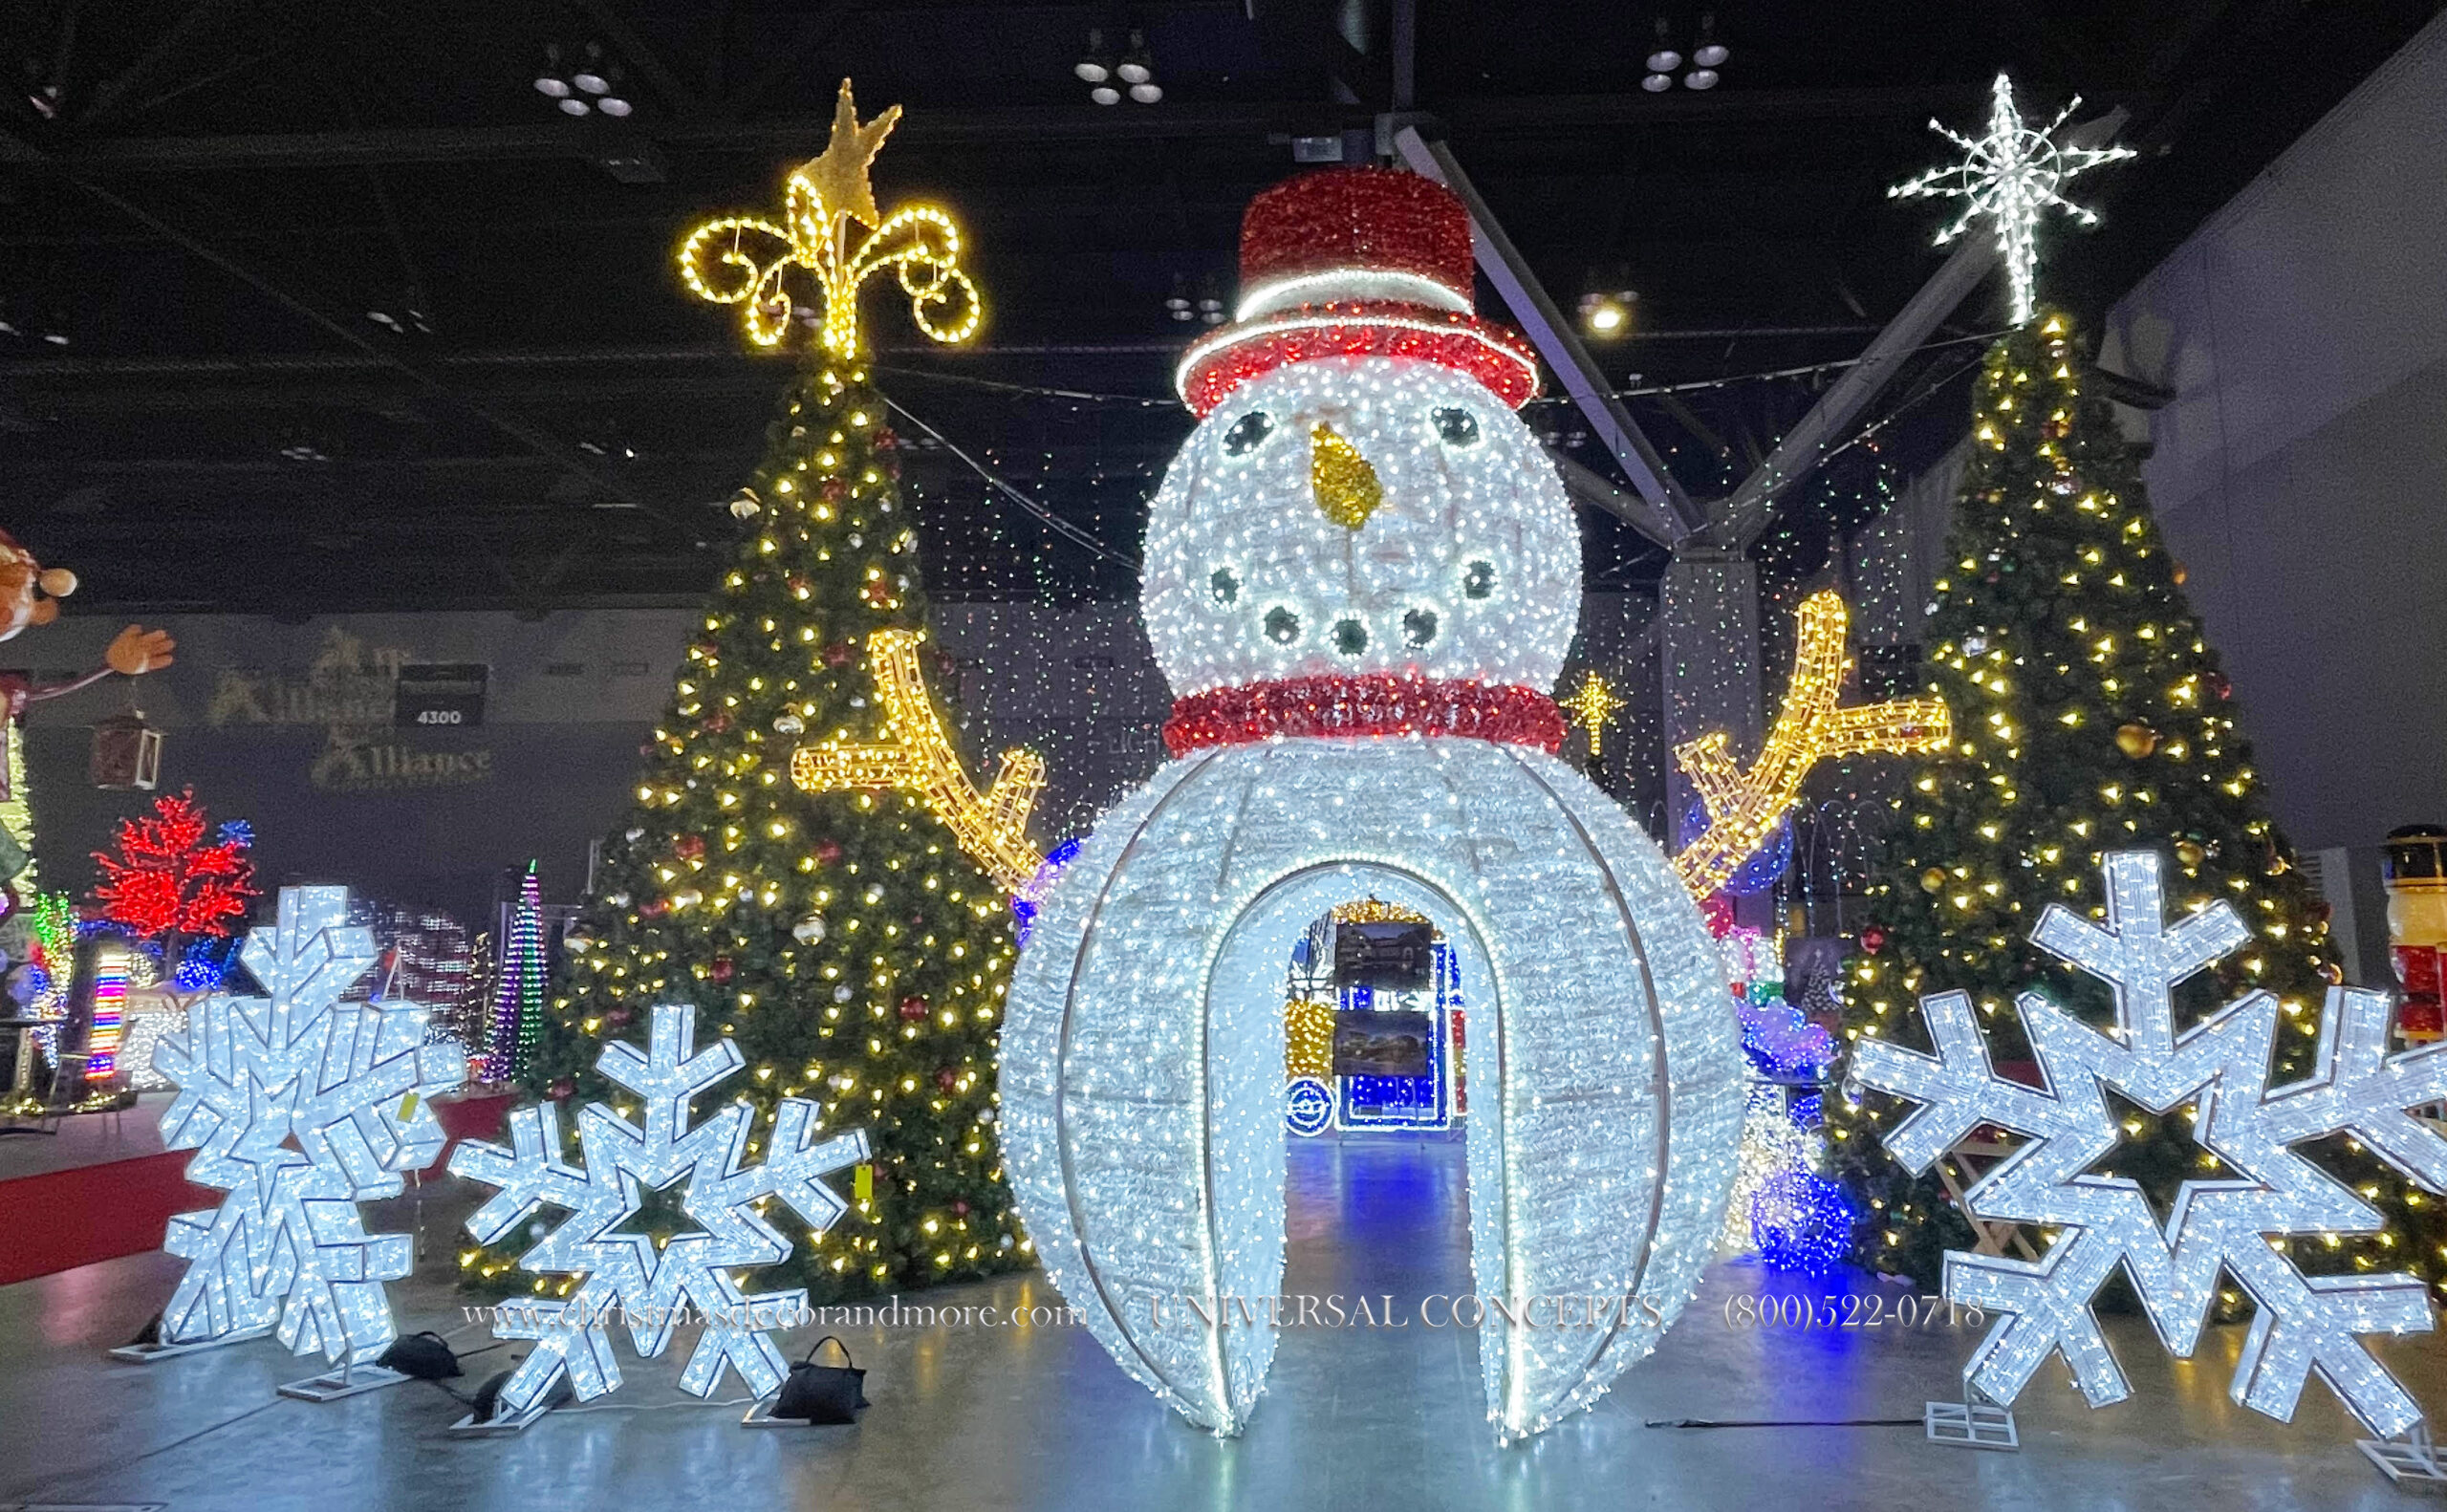 giant LED lighted snowman sculpture